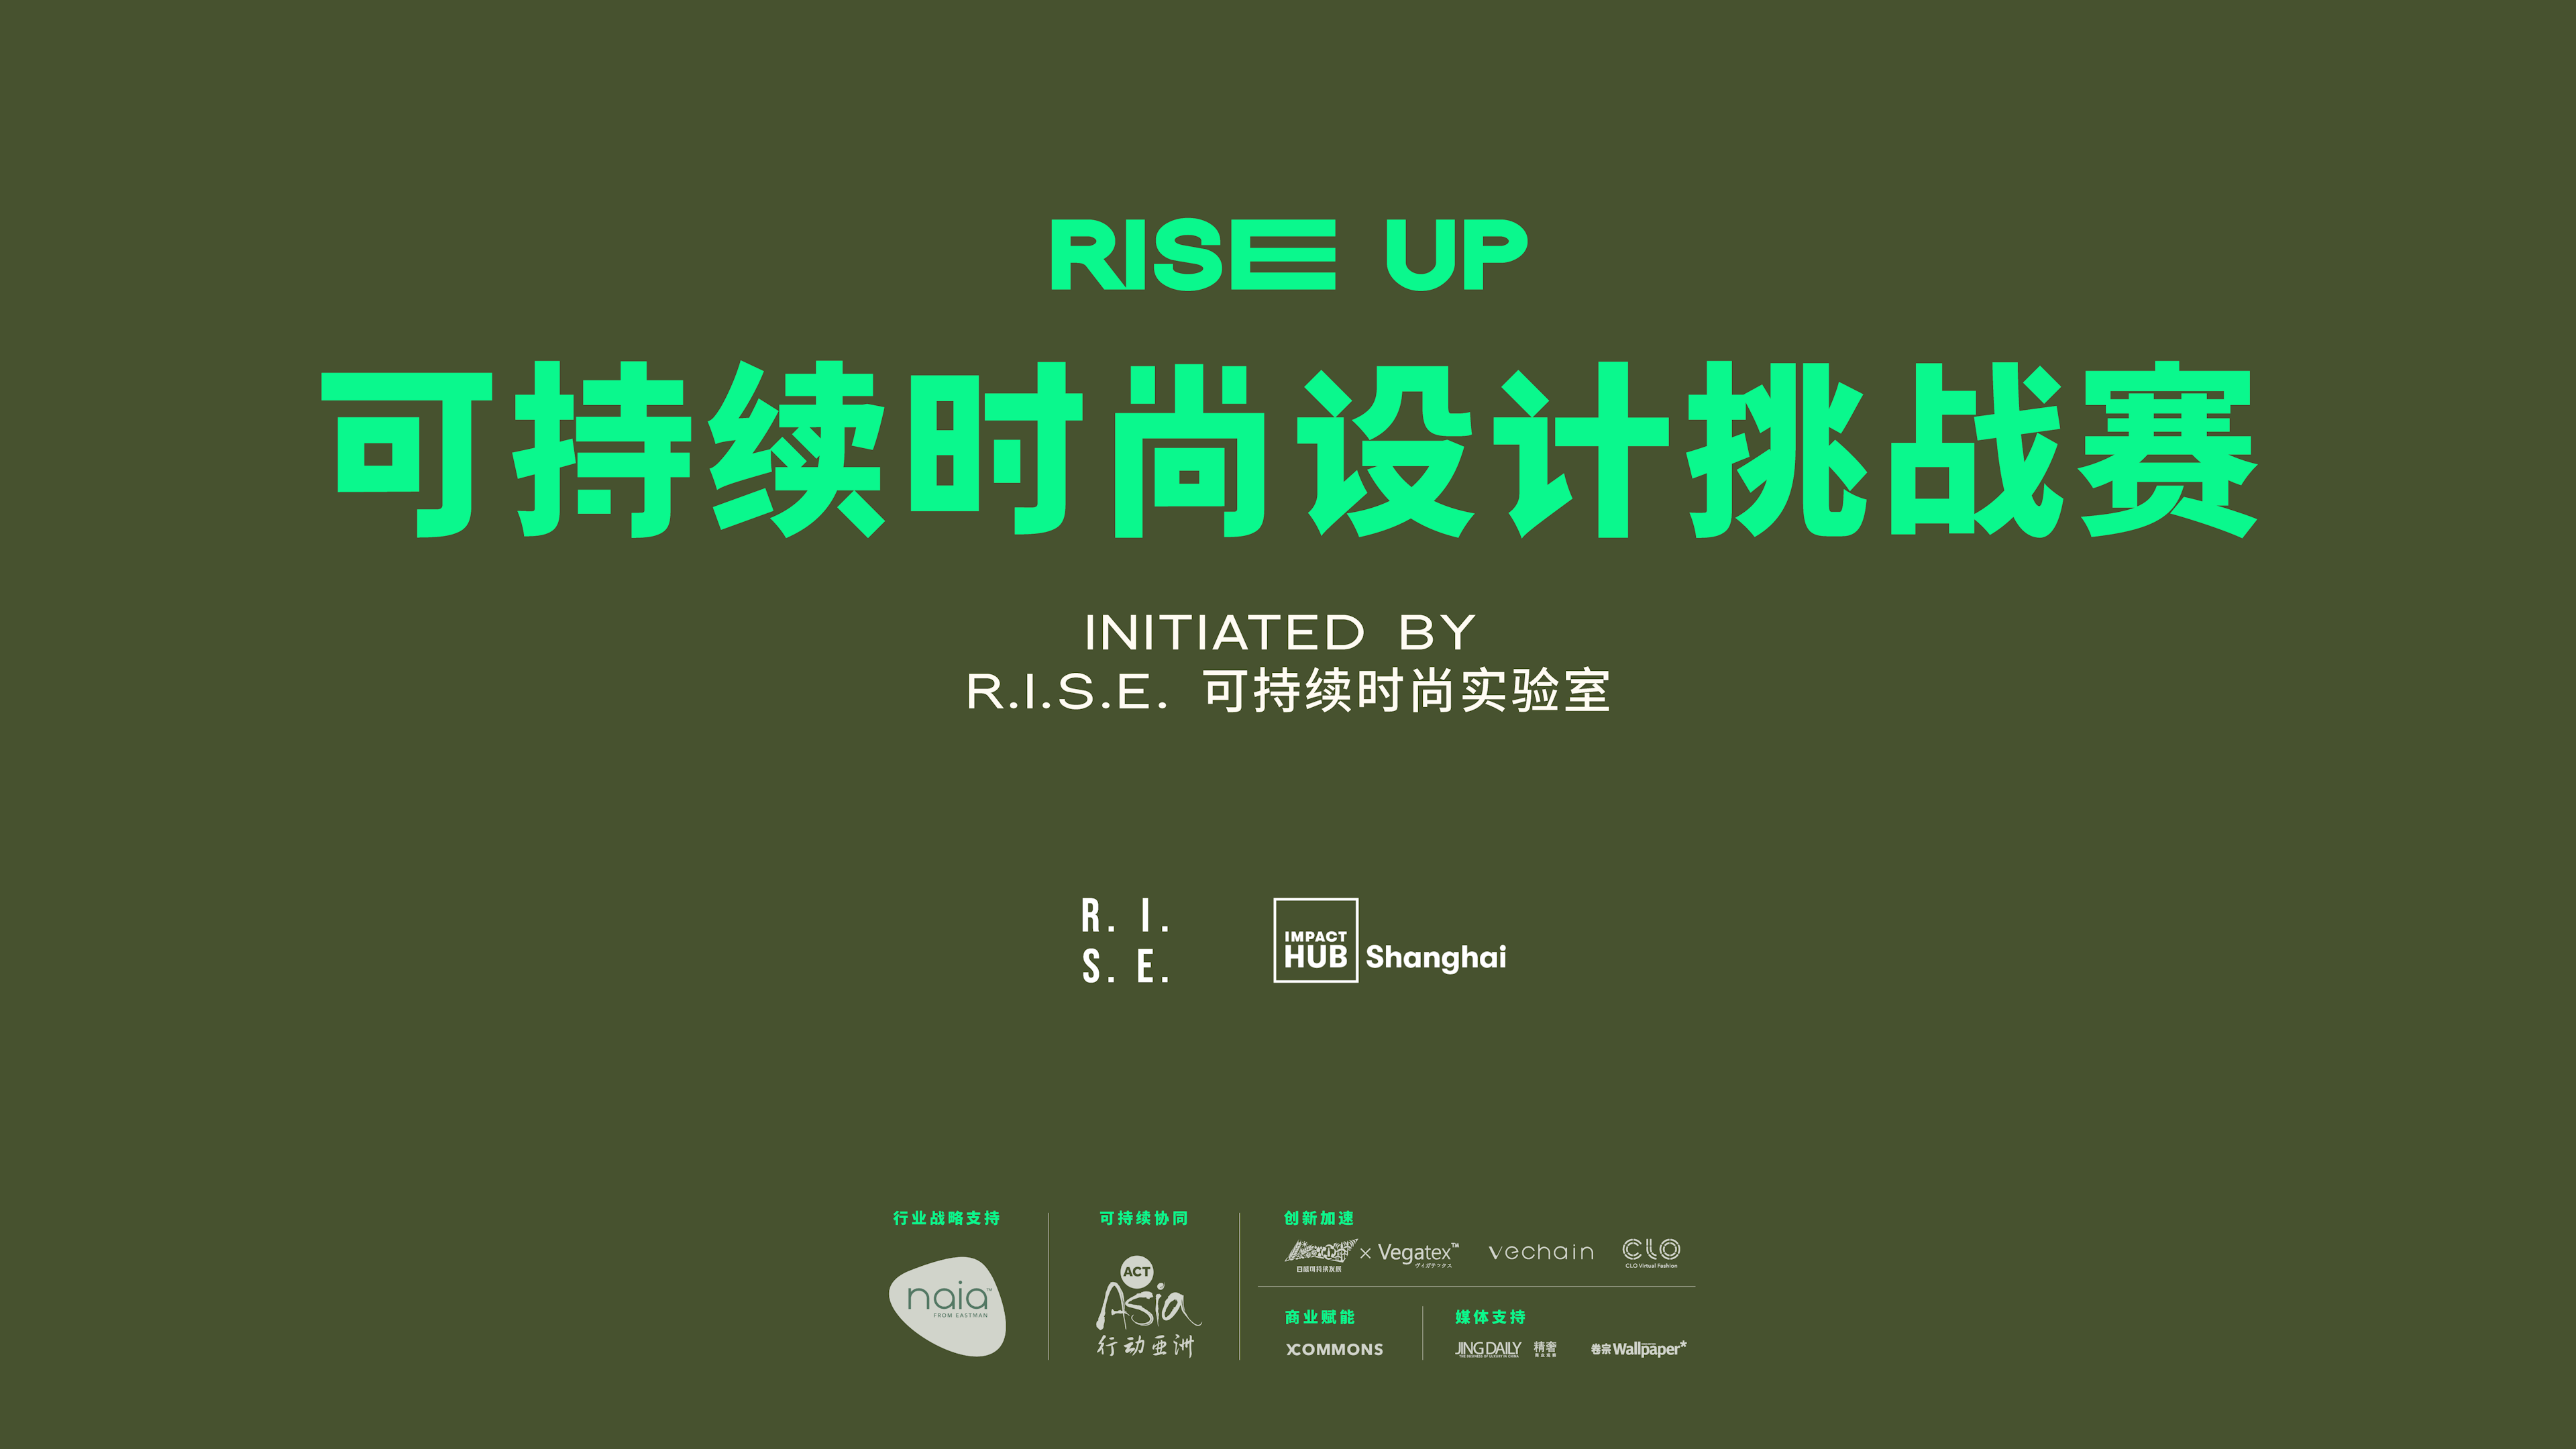 Introducing the second edition of Mainland China’s only sustainable fashion award. How will it shape the industry? Photo: R.I.S.E. Sustainable Fashion Lab